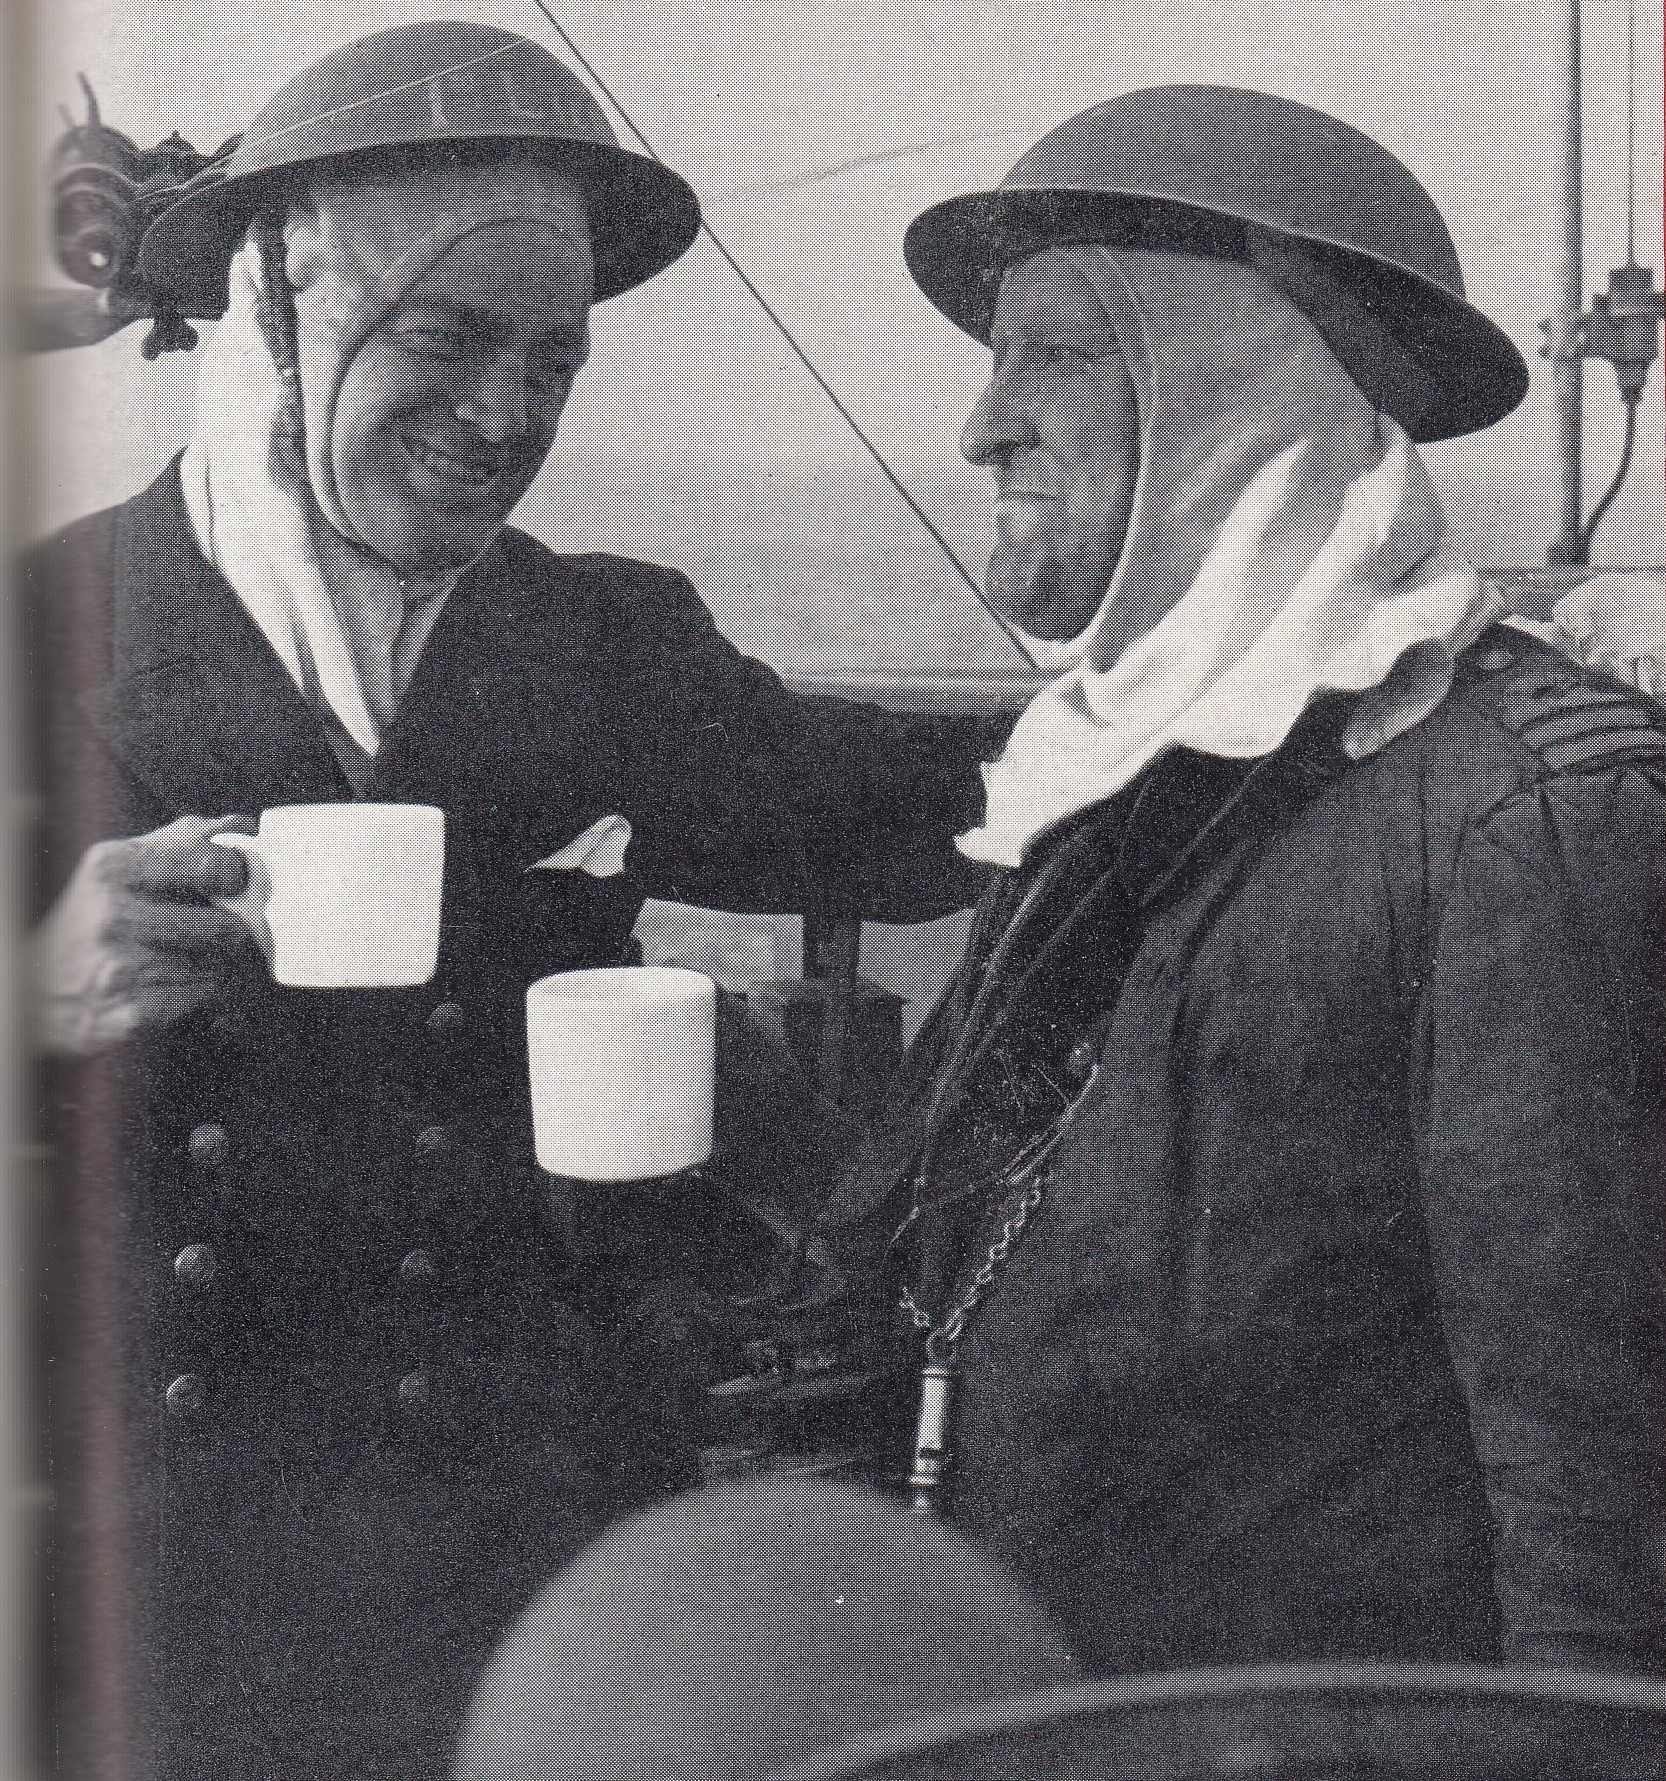 Lieutenant Commander Coughlin shares a cup of tea with his captain, Commander James “Jimmy” Hibbard.